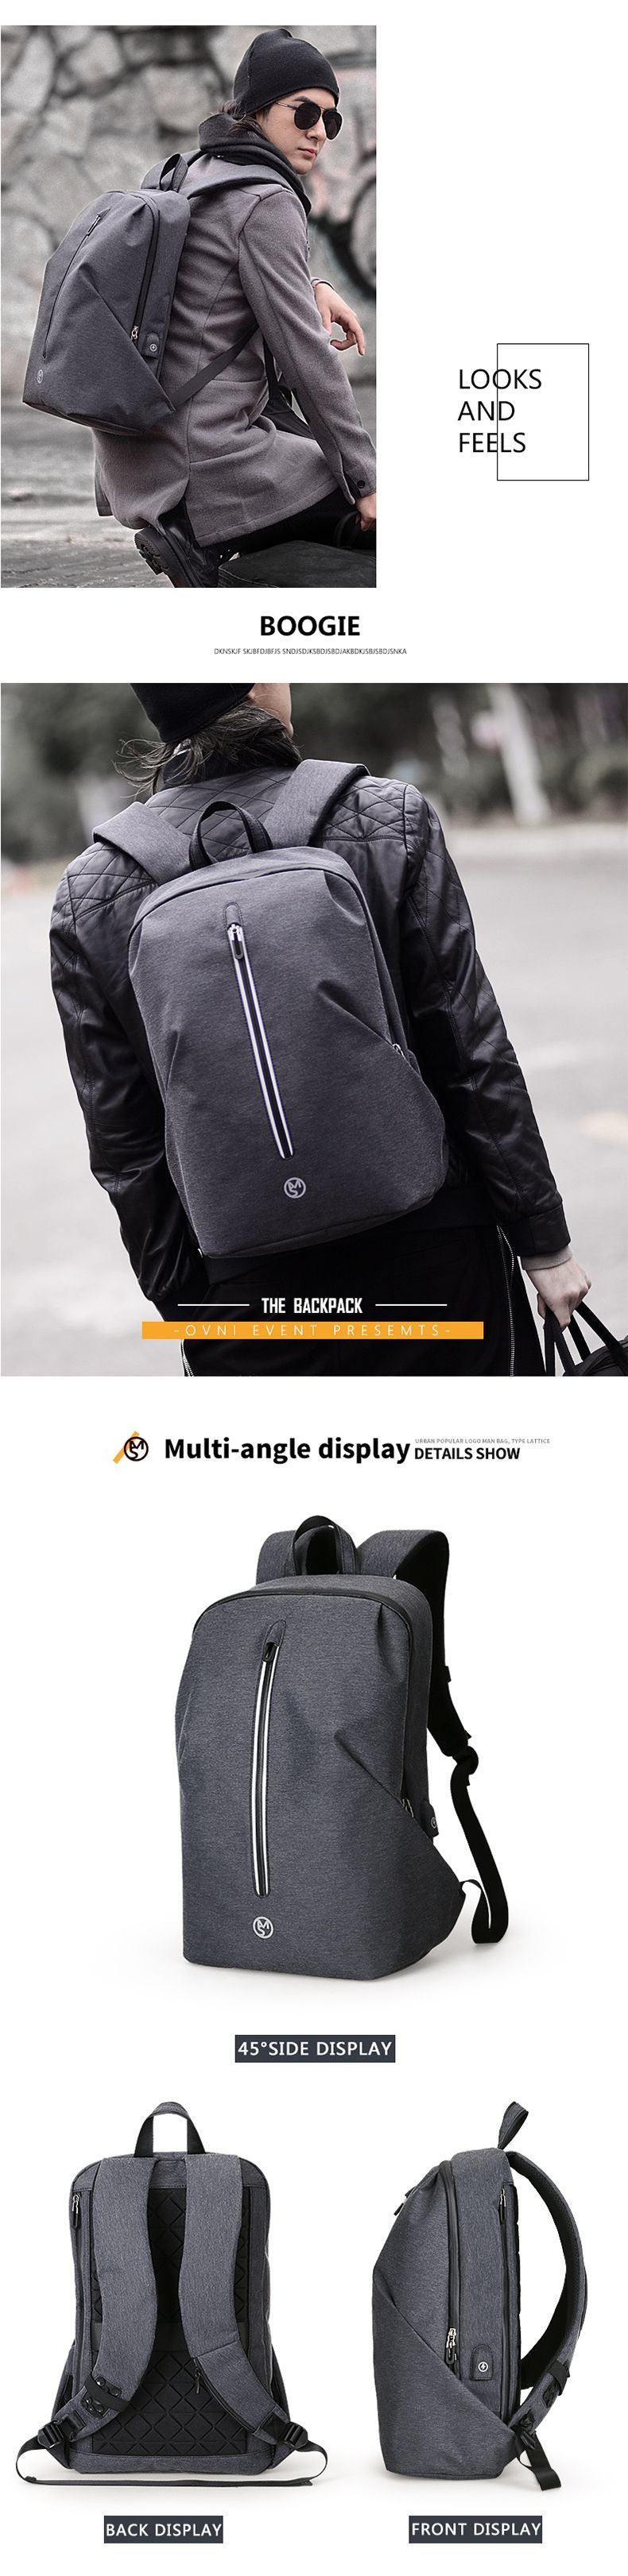 Mazzy-Star-MS_147-15-Inch-Laptop-Backpack-USB-Charging-Anti-thief-Laptop-Bag-Mens-Shoulder-Bag-Busin-1529315